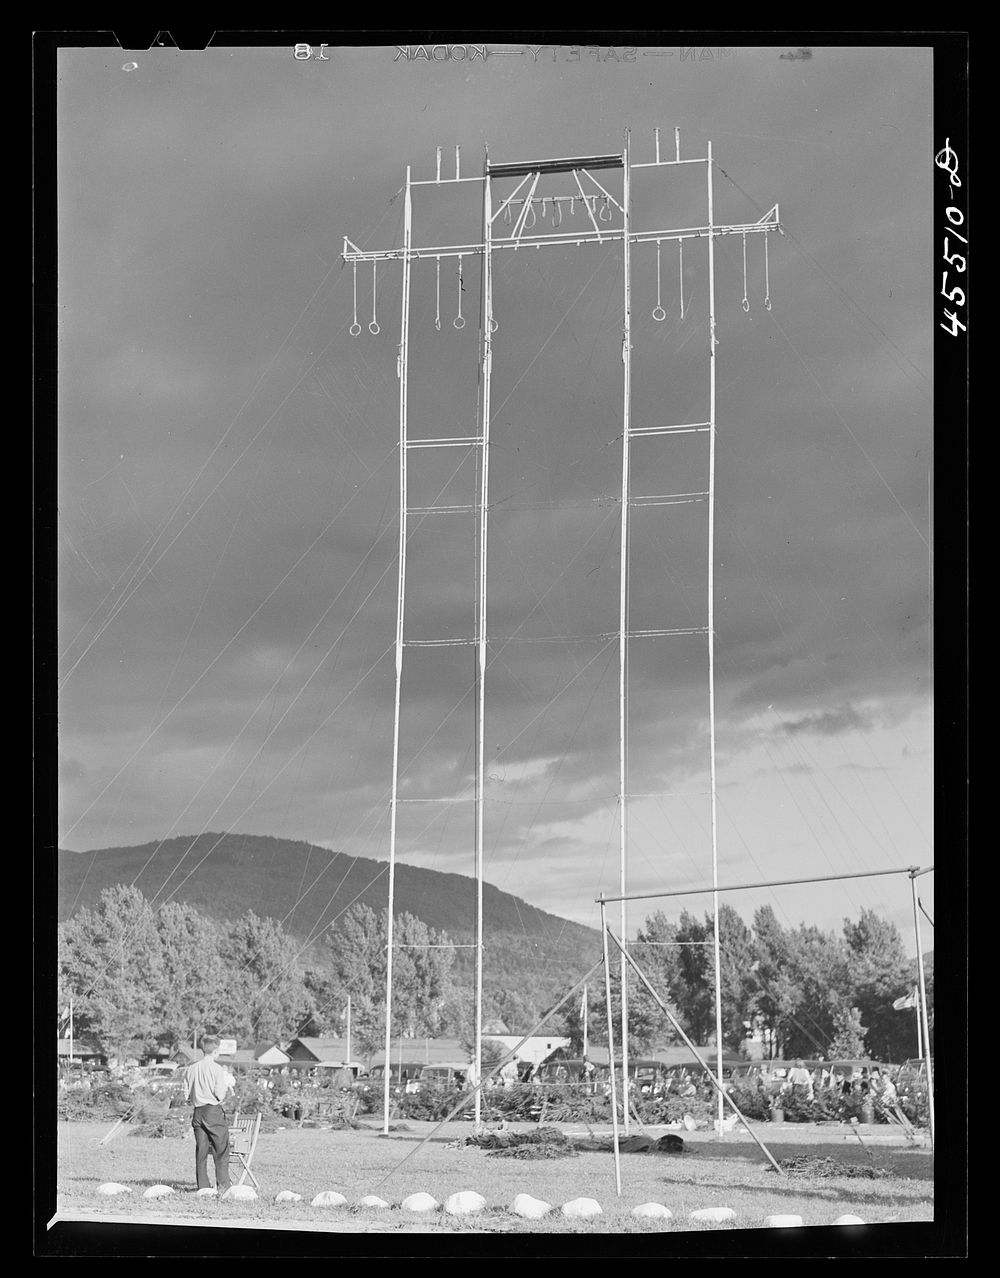 [Untitled photo, possibly related to: Trapeze artists at the Rutland Fair, Vermont]. Sourced from the Library of Congress.